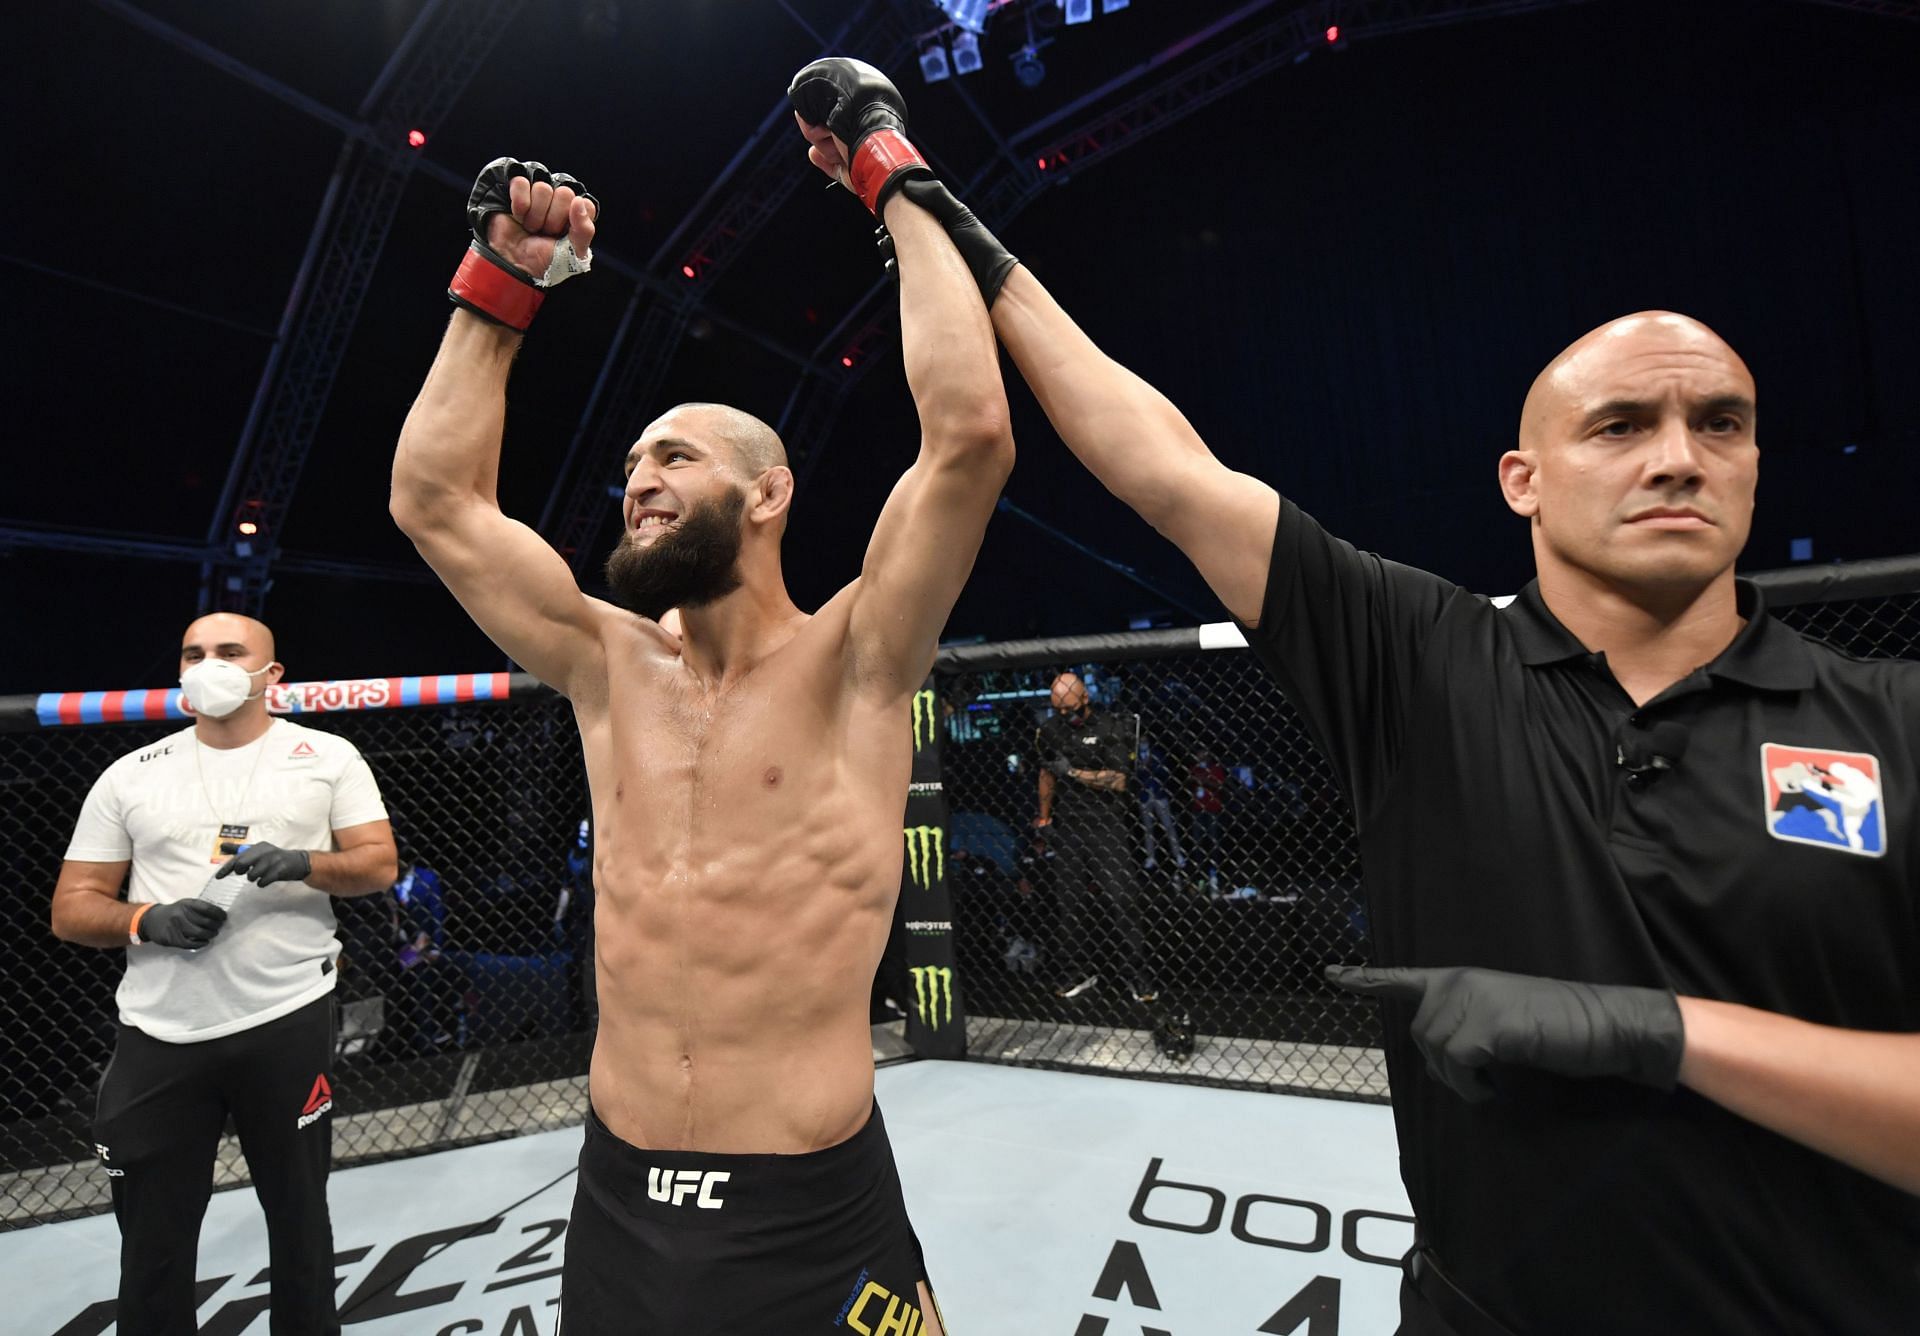 Khamzat Chimaev shot to fame after winning a late-notice octagon debut fight.